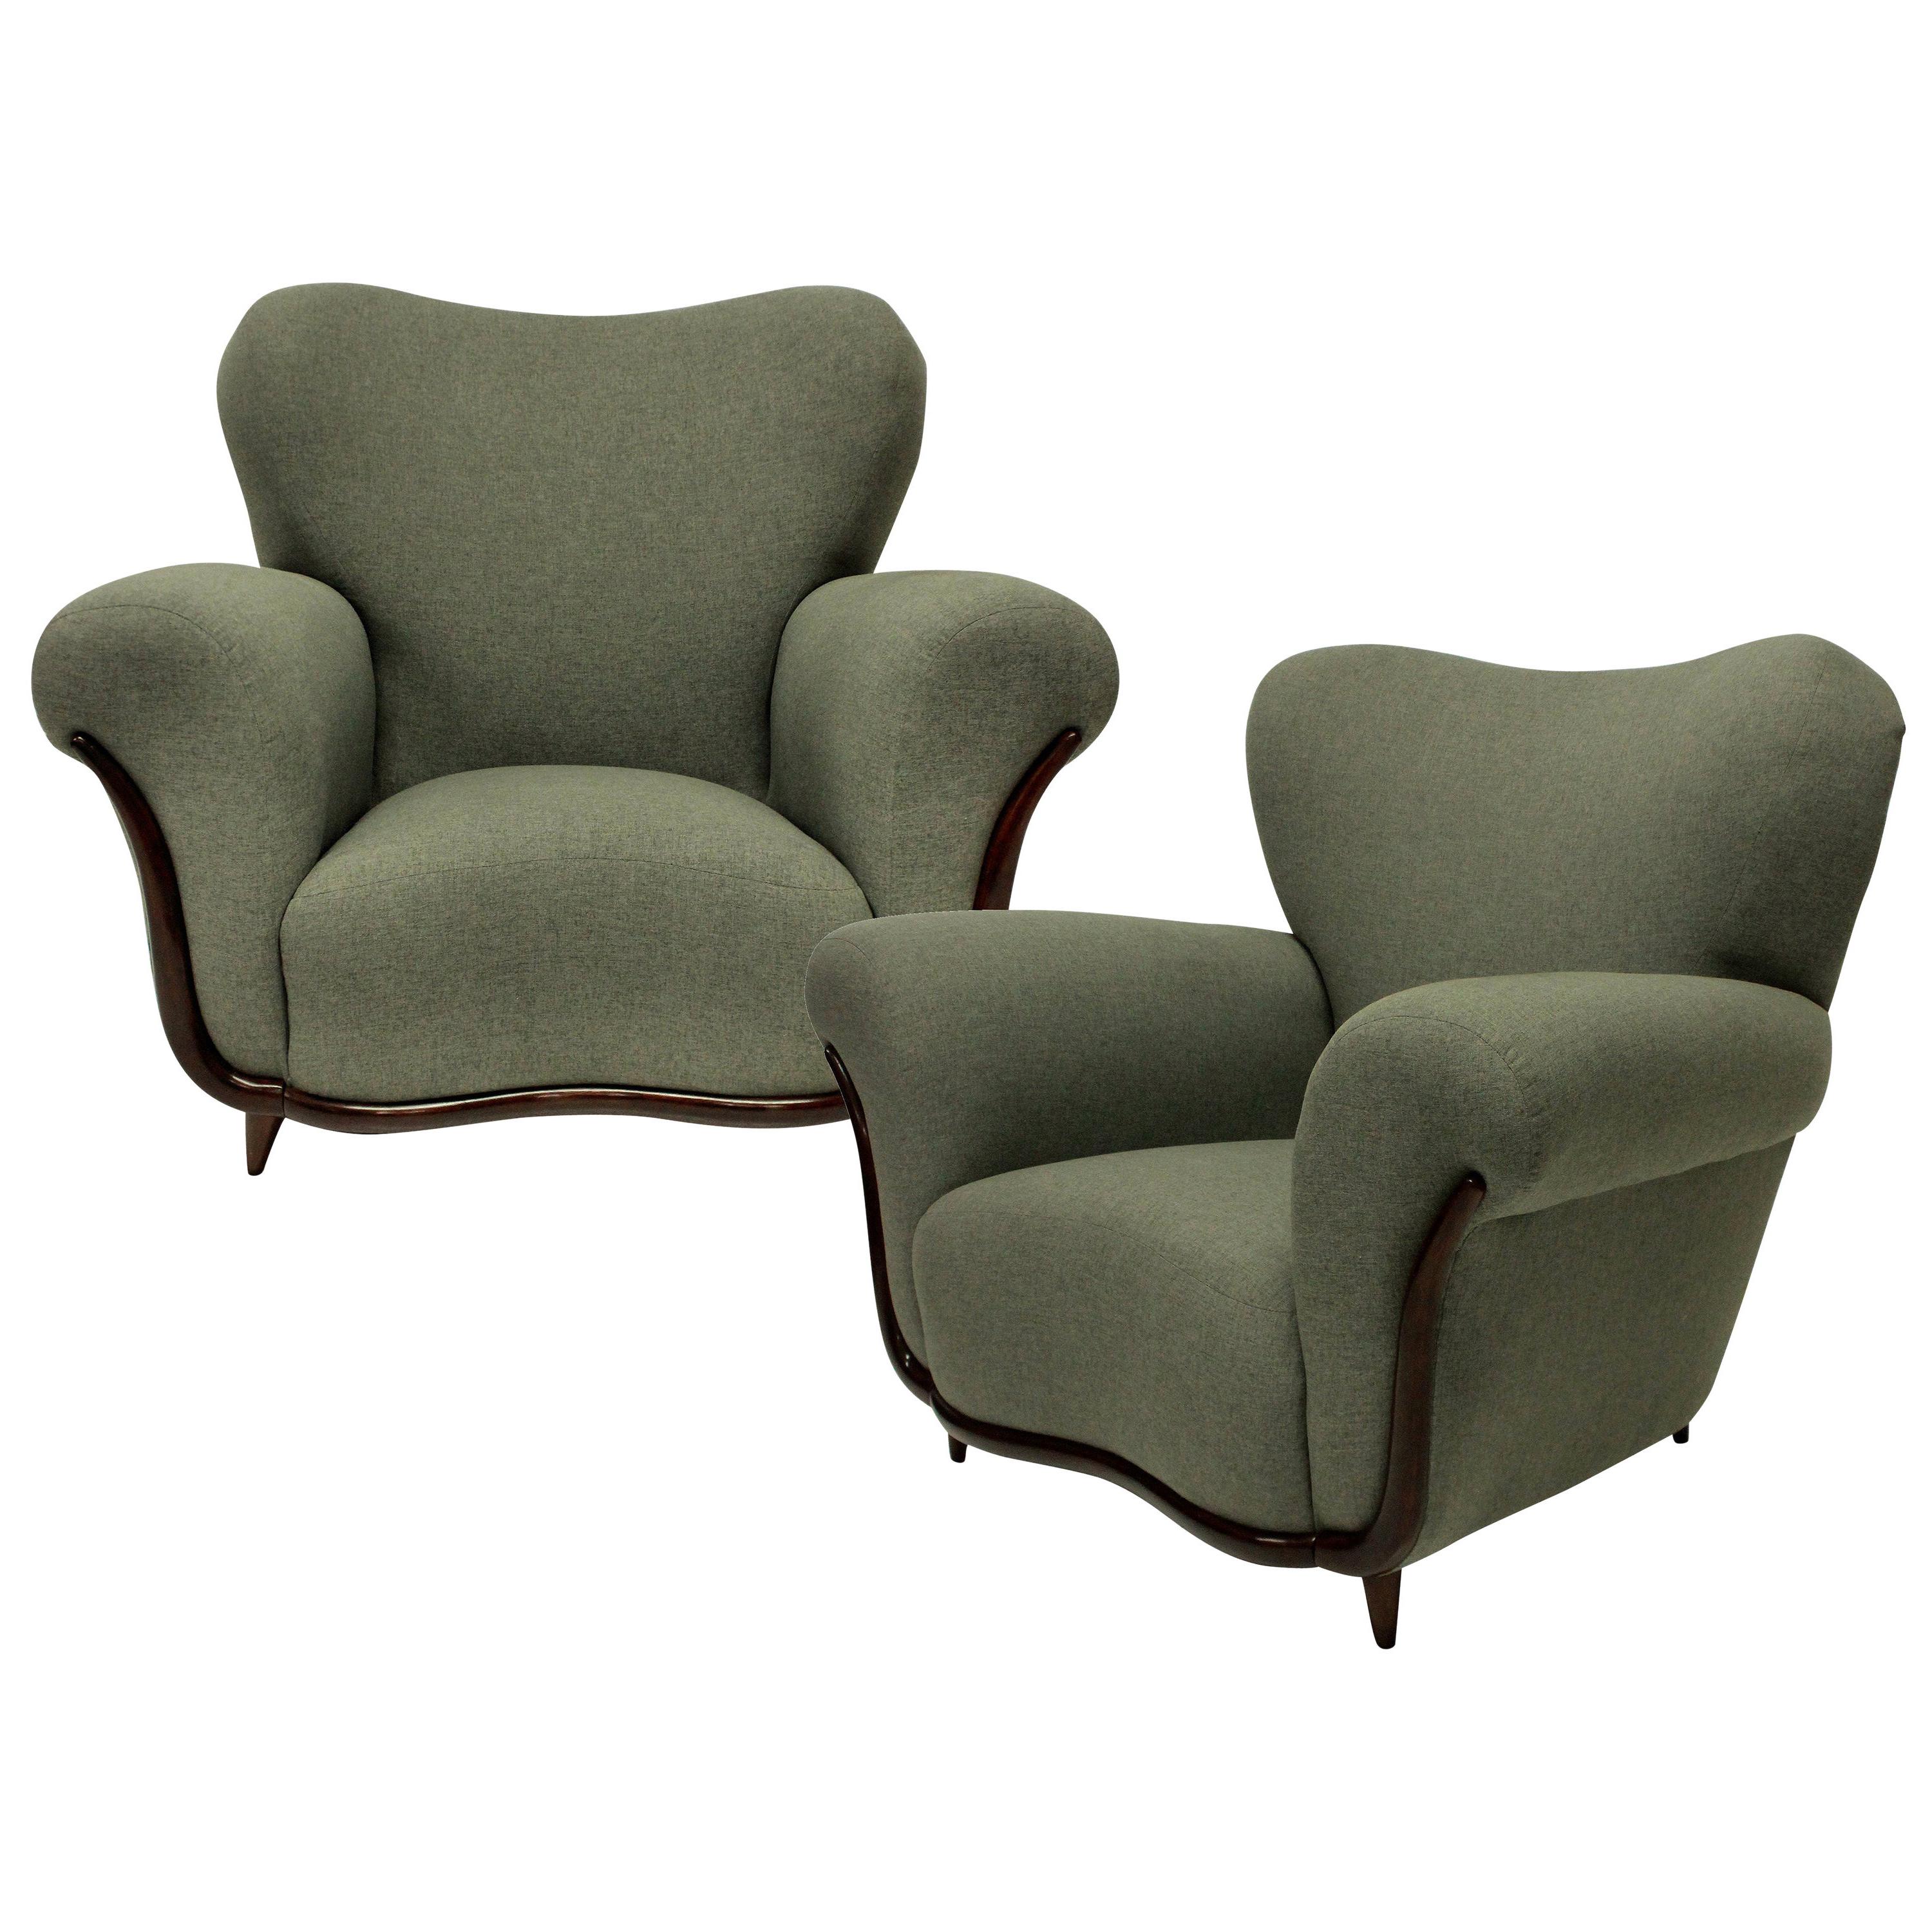 Pair of Large Sculptural Armchairs by Ulrich